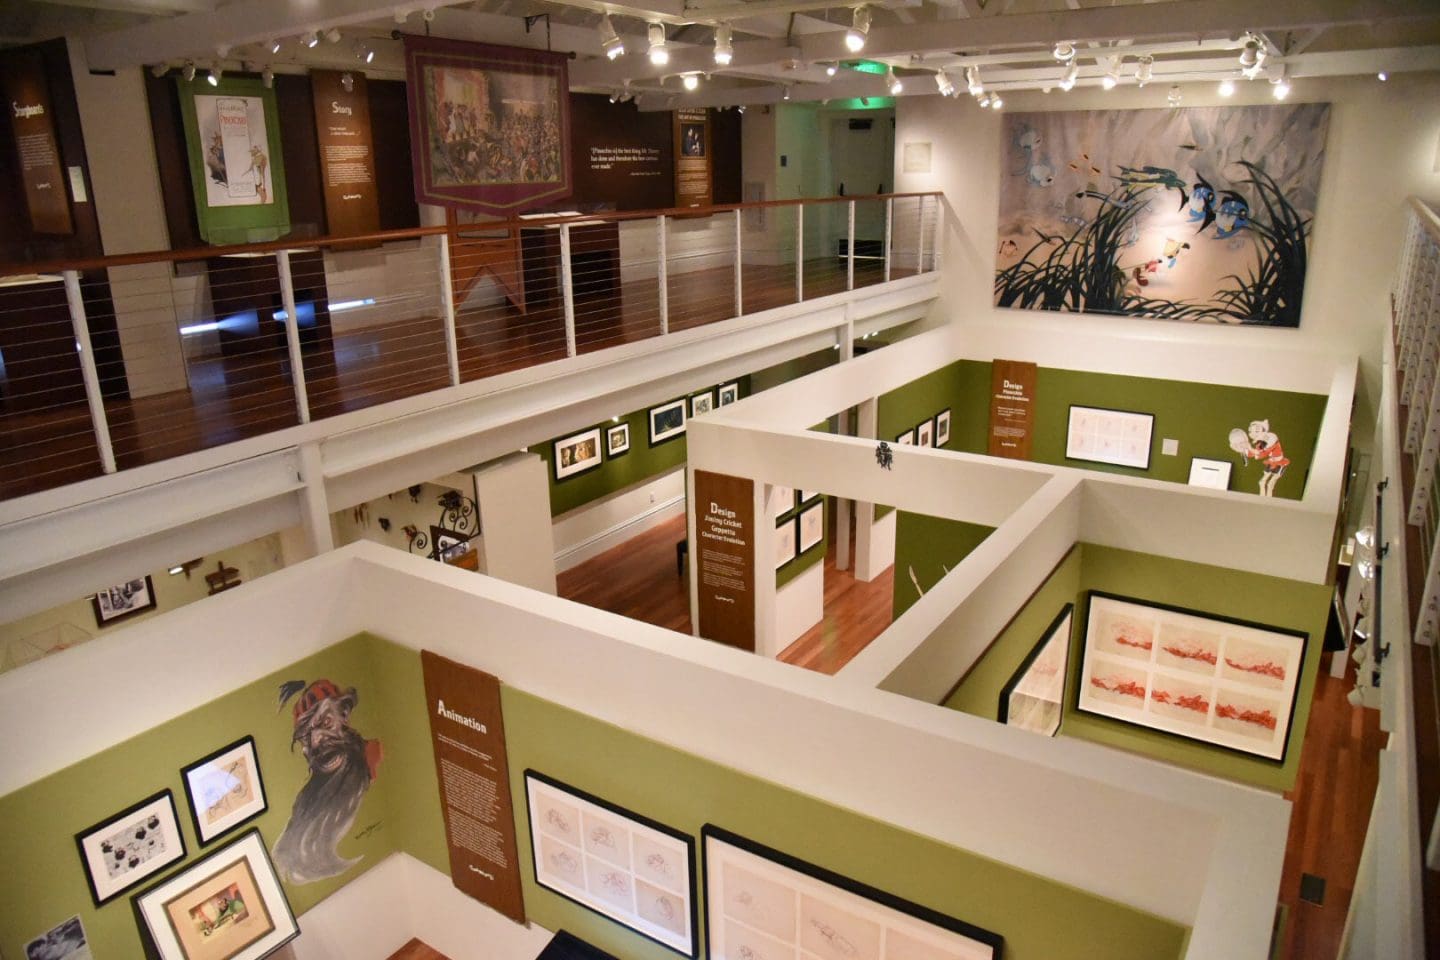 Overview of the exhibition at the Walt Disney Family Museum.